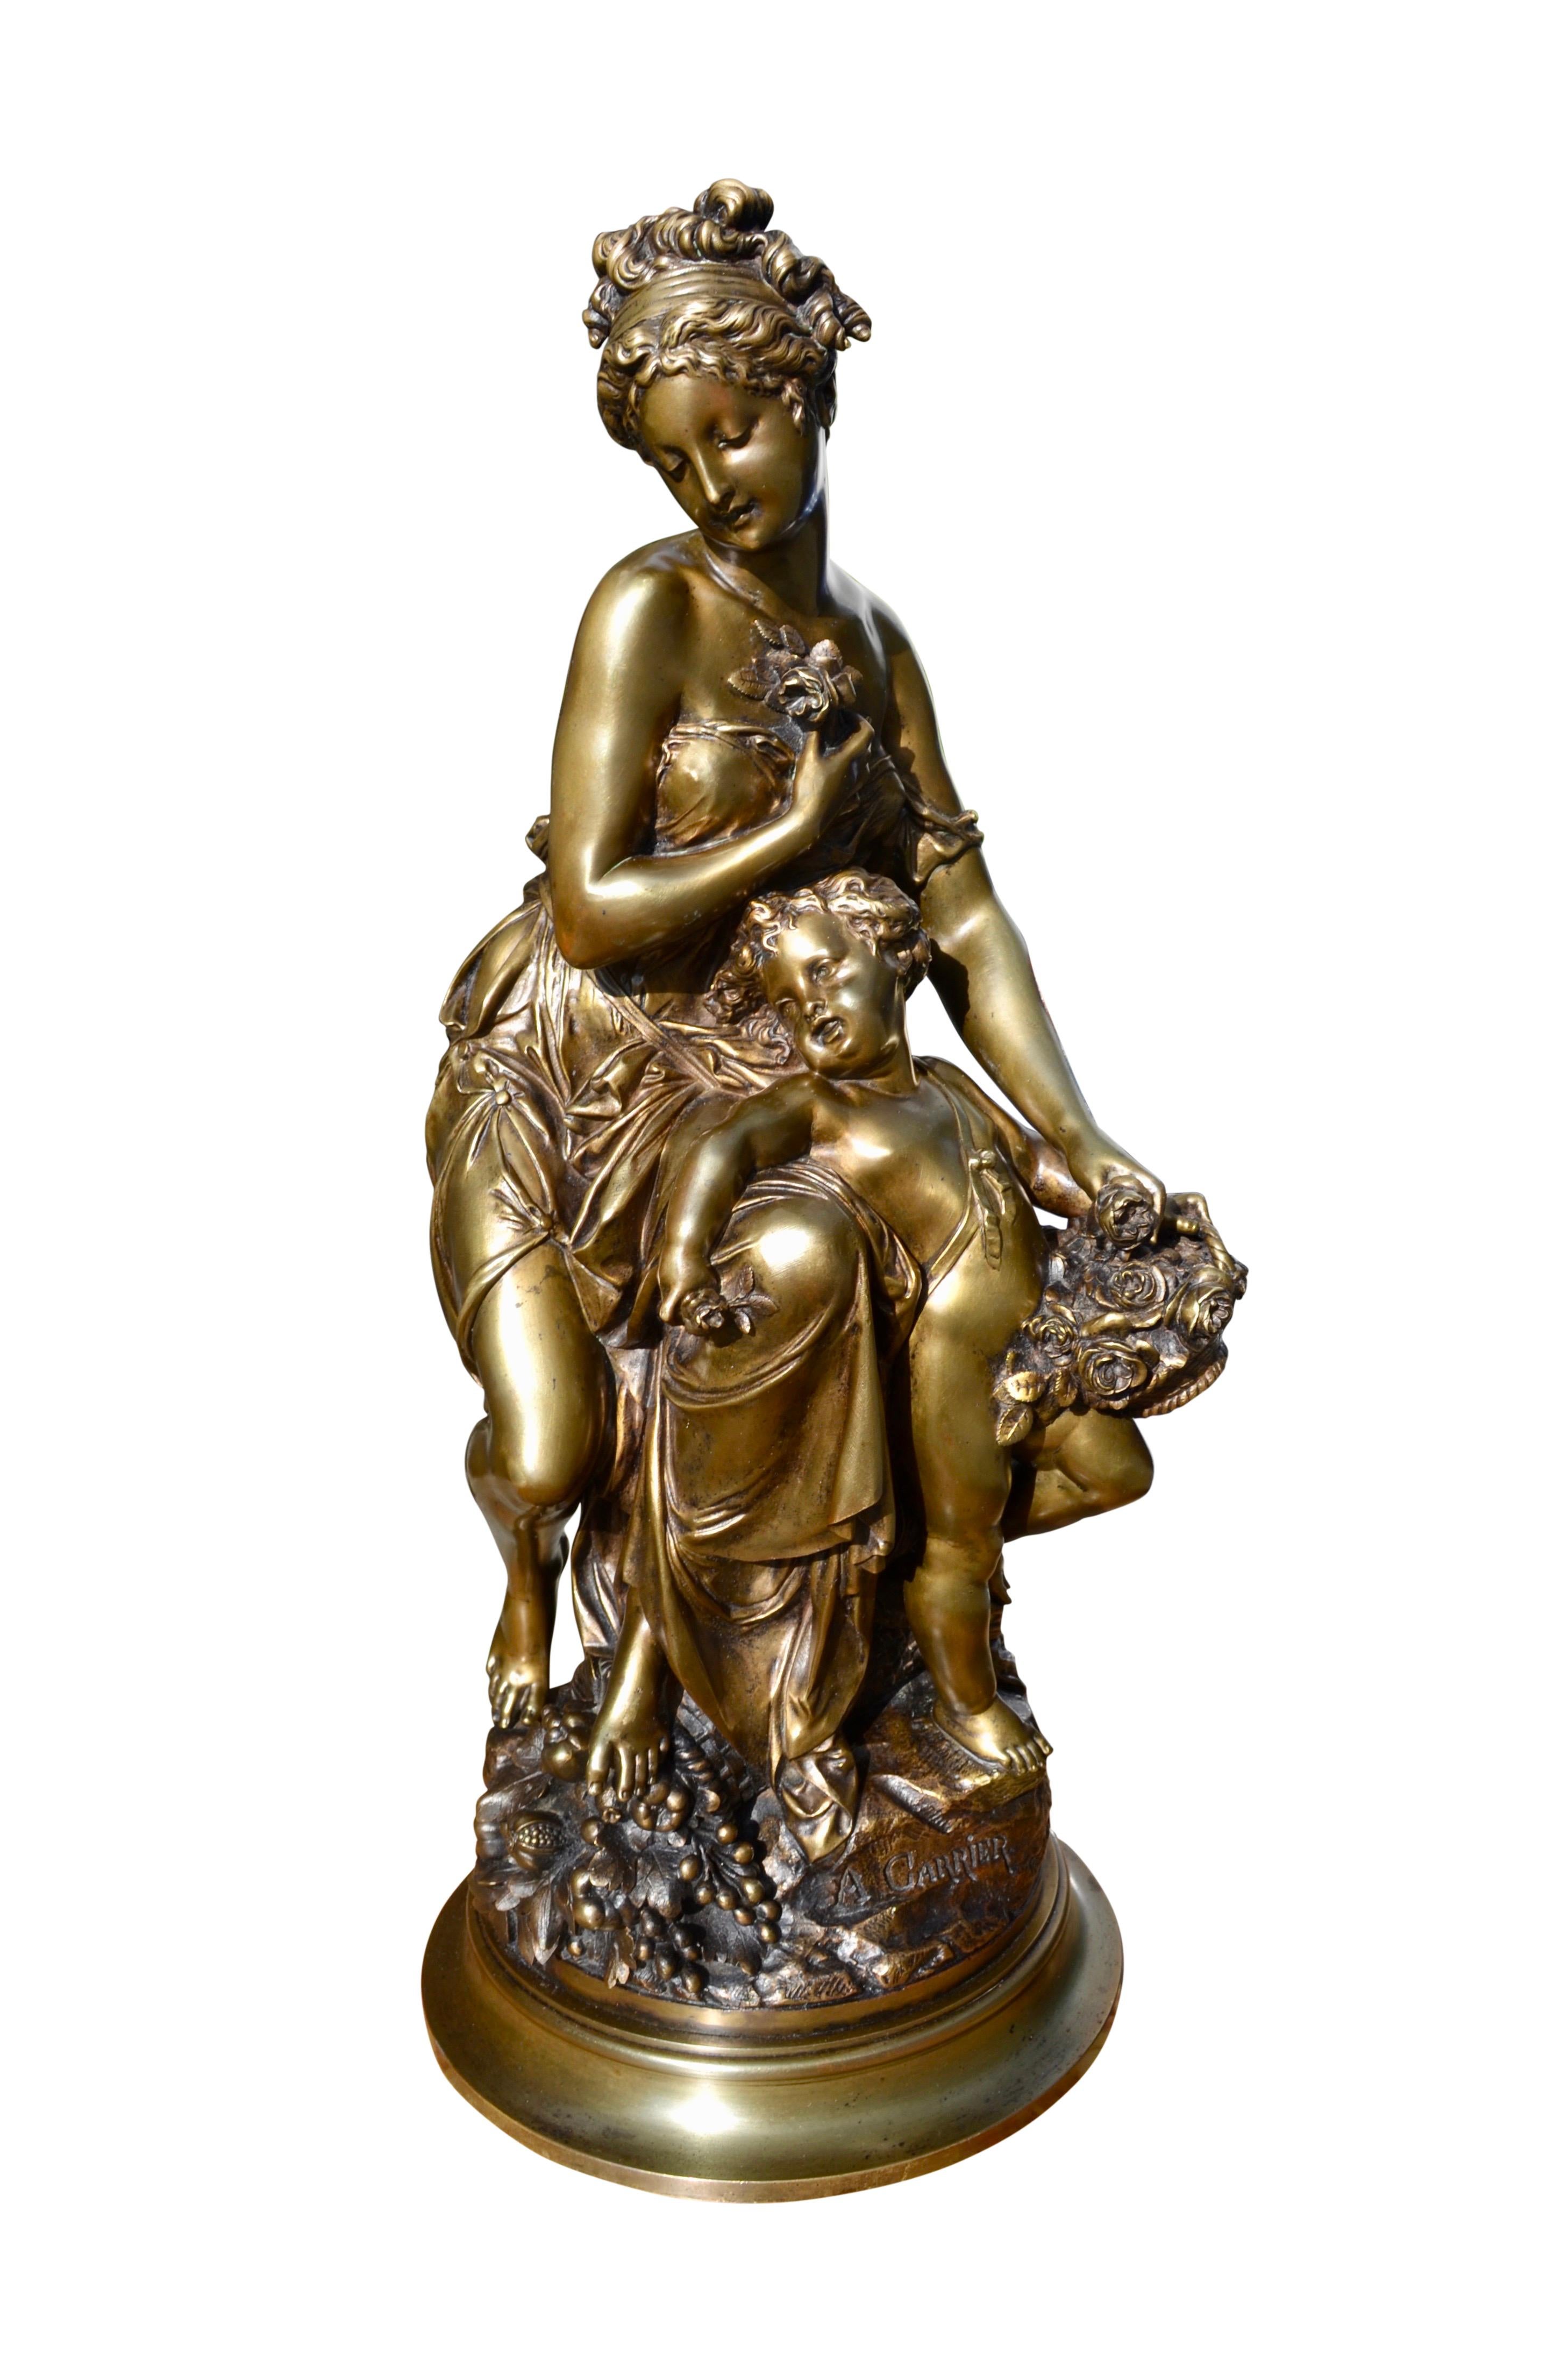 A beautifully cast gilt bronze statue of a classically draped seminude maiden representing Venus sitting on a tree trunk with  her son a nude standing cupid  holding a basket of roses leaning against Venus's left knee. Venus has one hand holding a